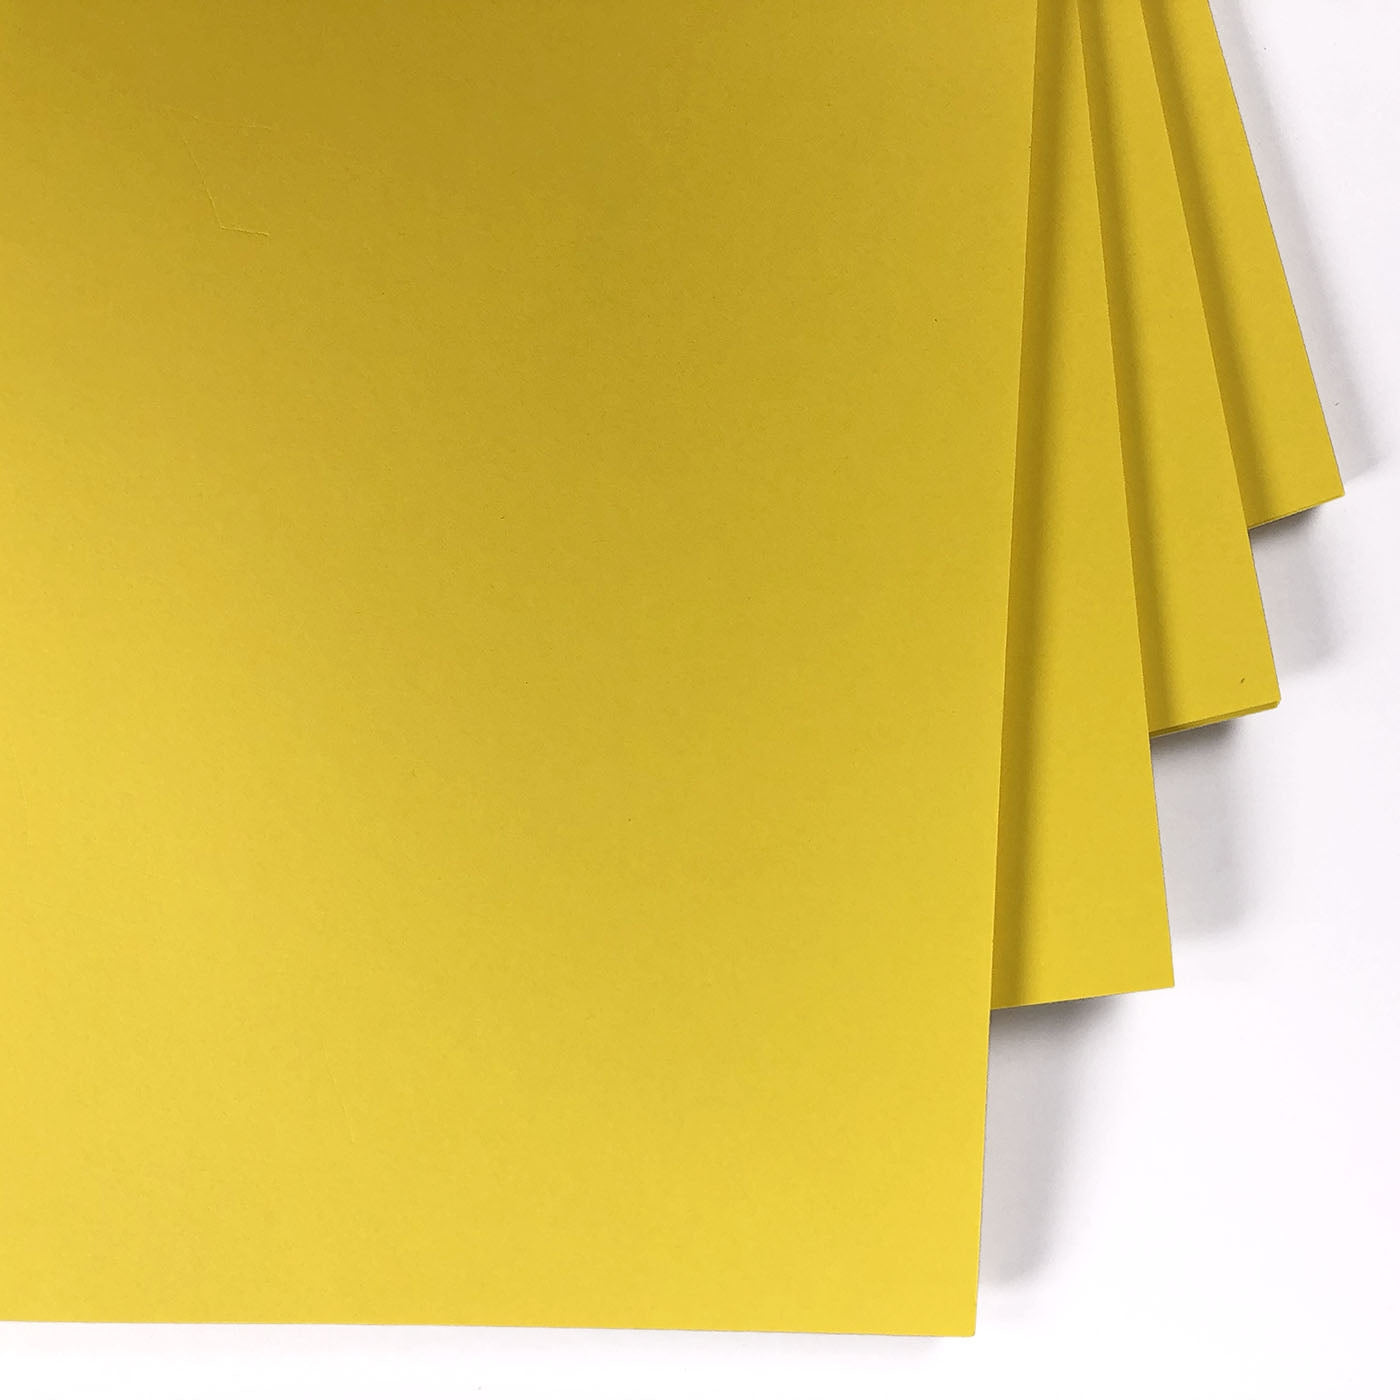 A5 or A4 INTENSE BRIGHT YELLOW CARD 160gsm SHEETS ARTS AND CRAFTS